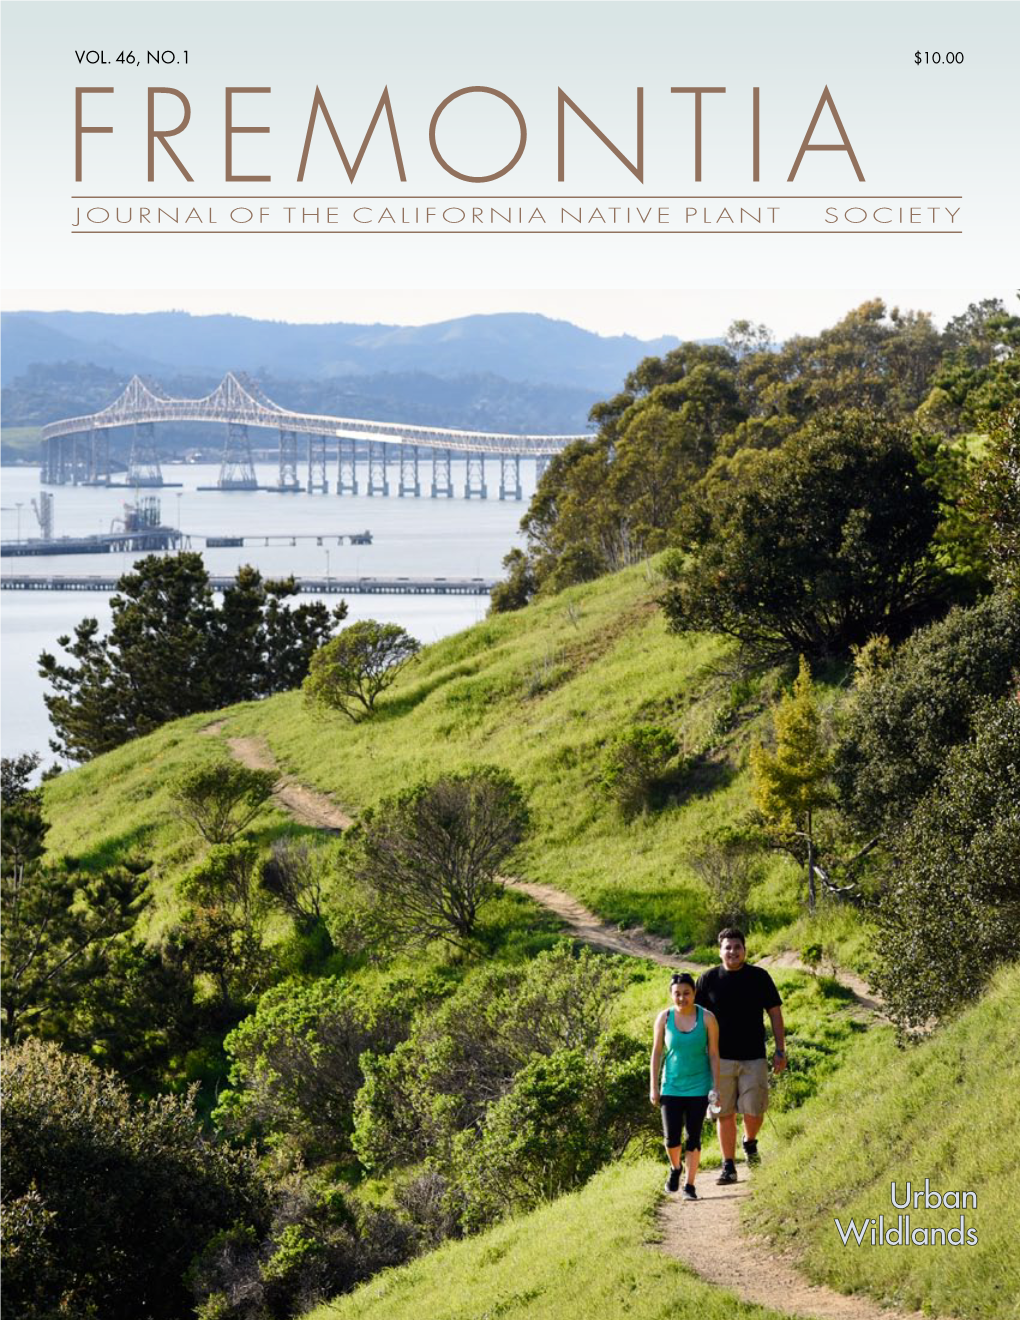 Download the Fremontia Urban Wildands Issue Here